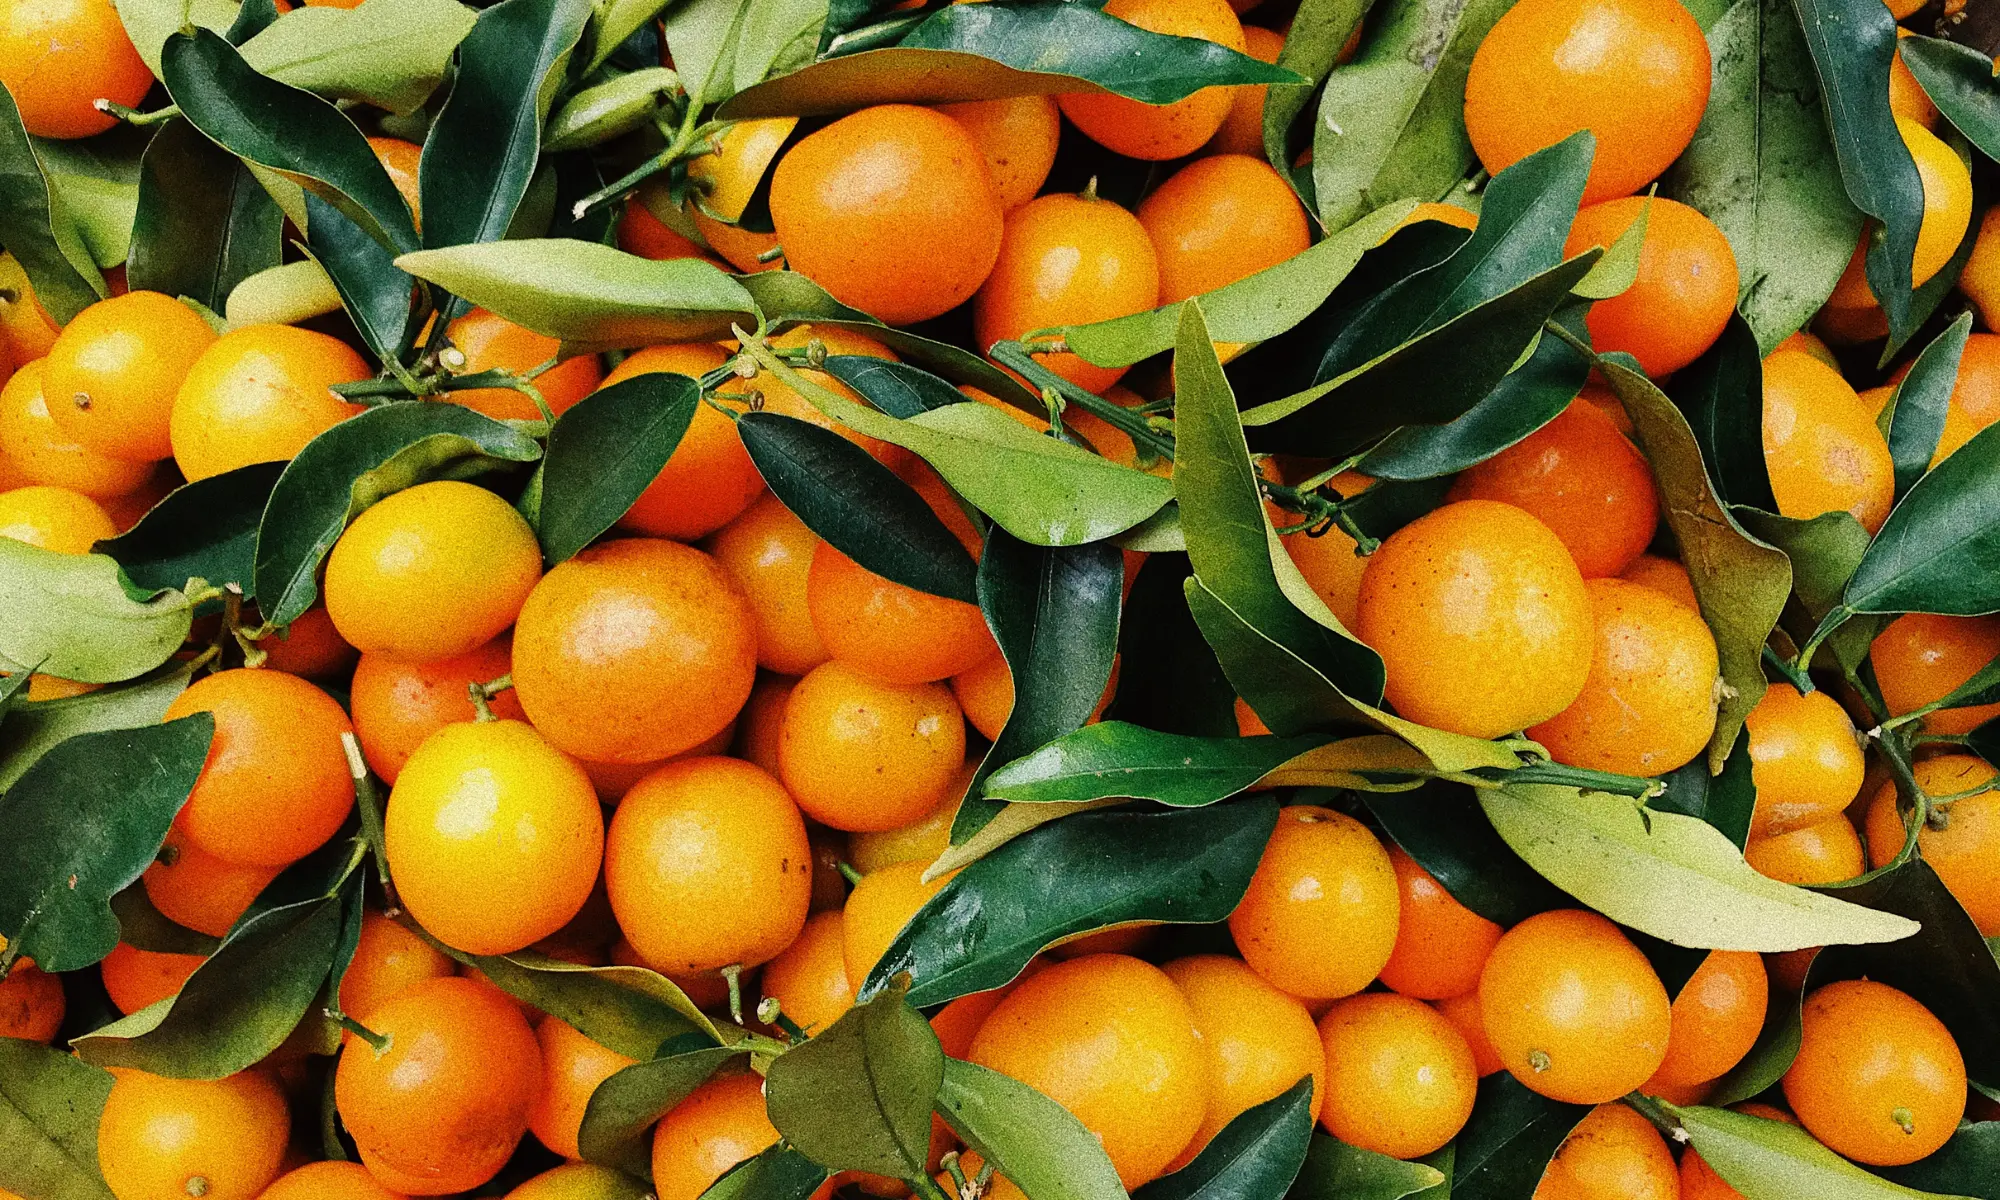 A pile of oranges and orange leaves.